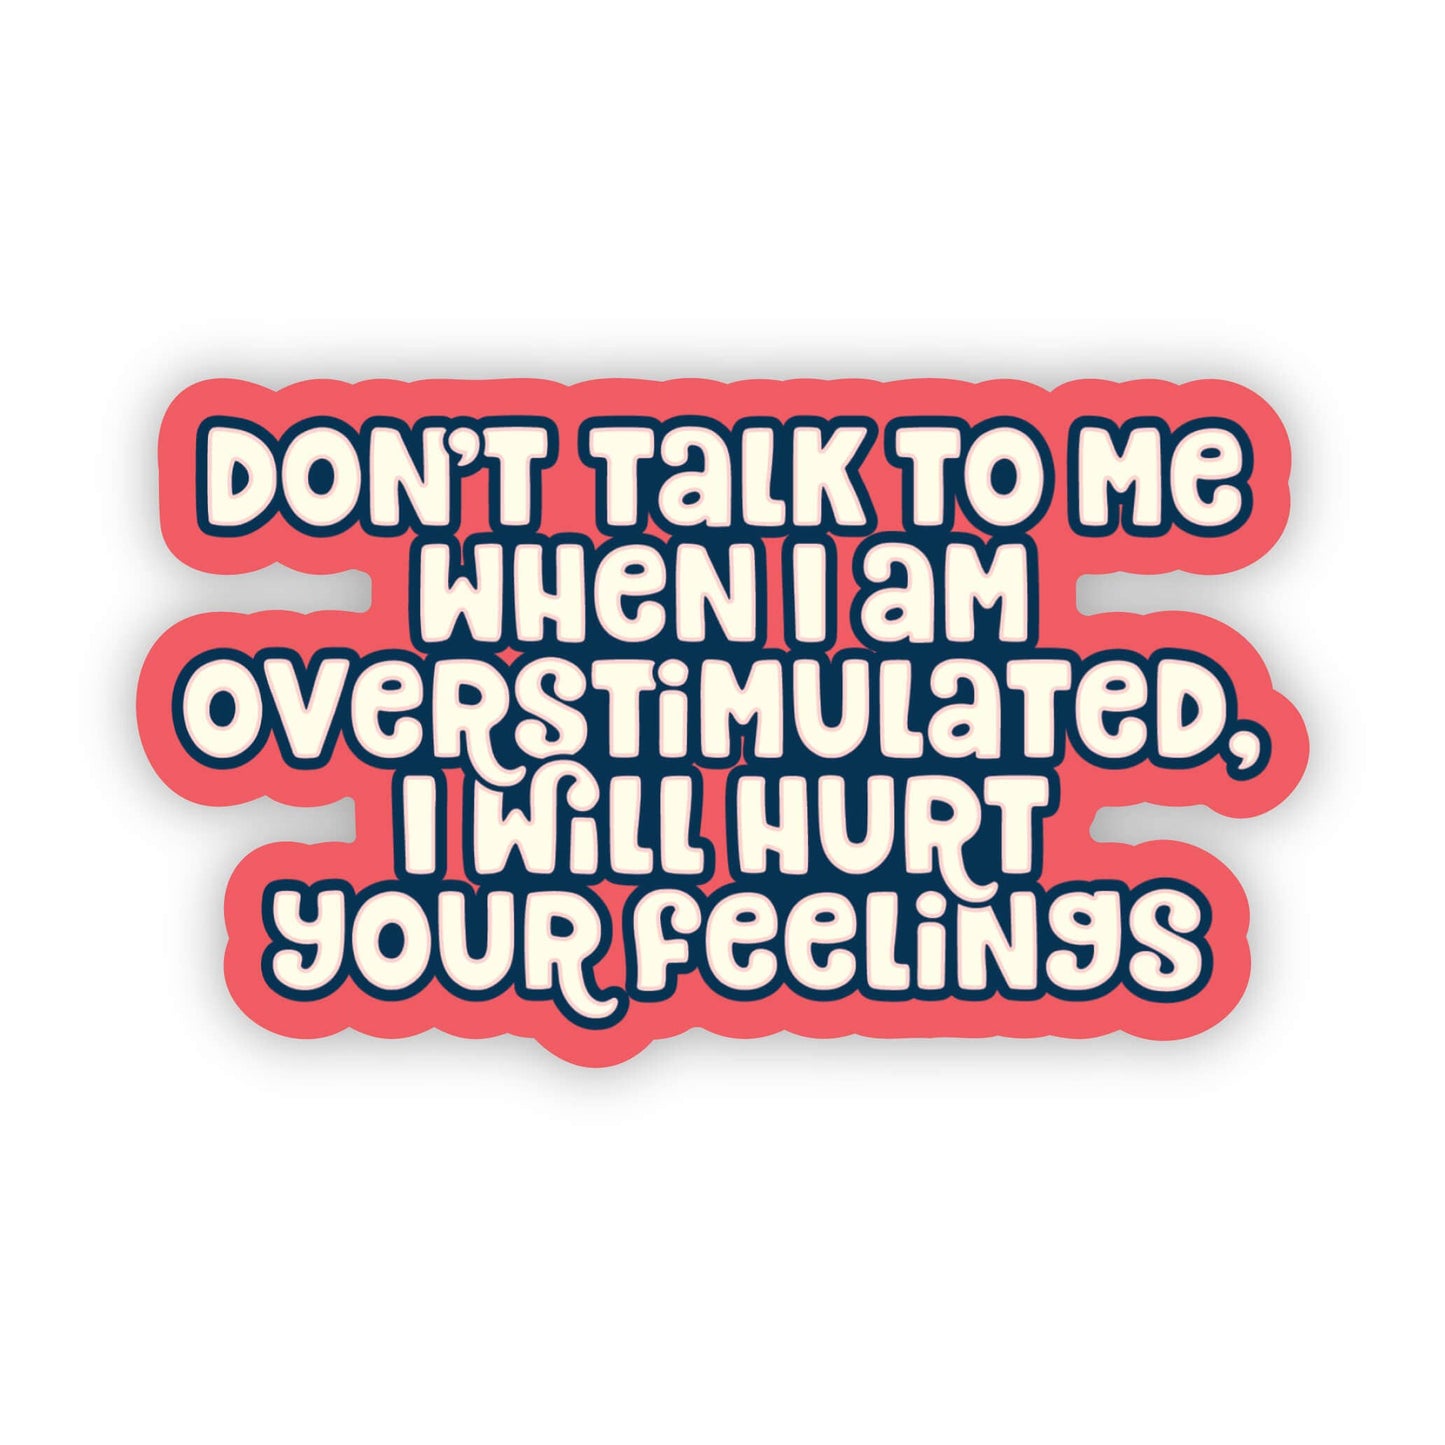 Don't Talk to Me When I am Overstimulated, I Will Hurt Your Feelings Sticker - Funny Sticker - Adult Sticker